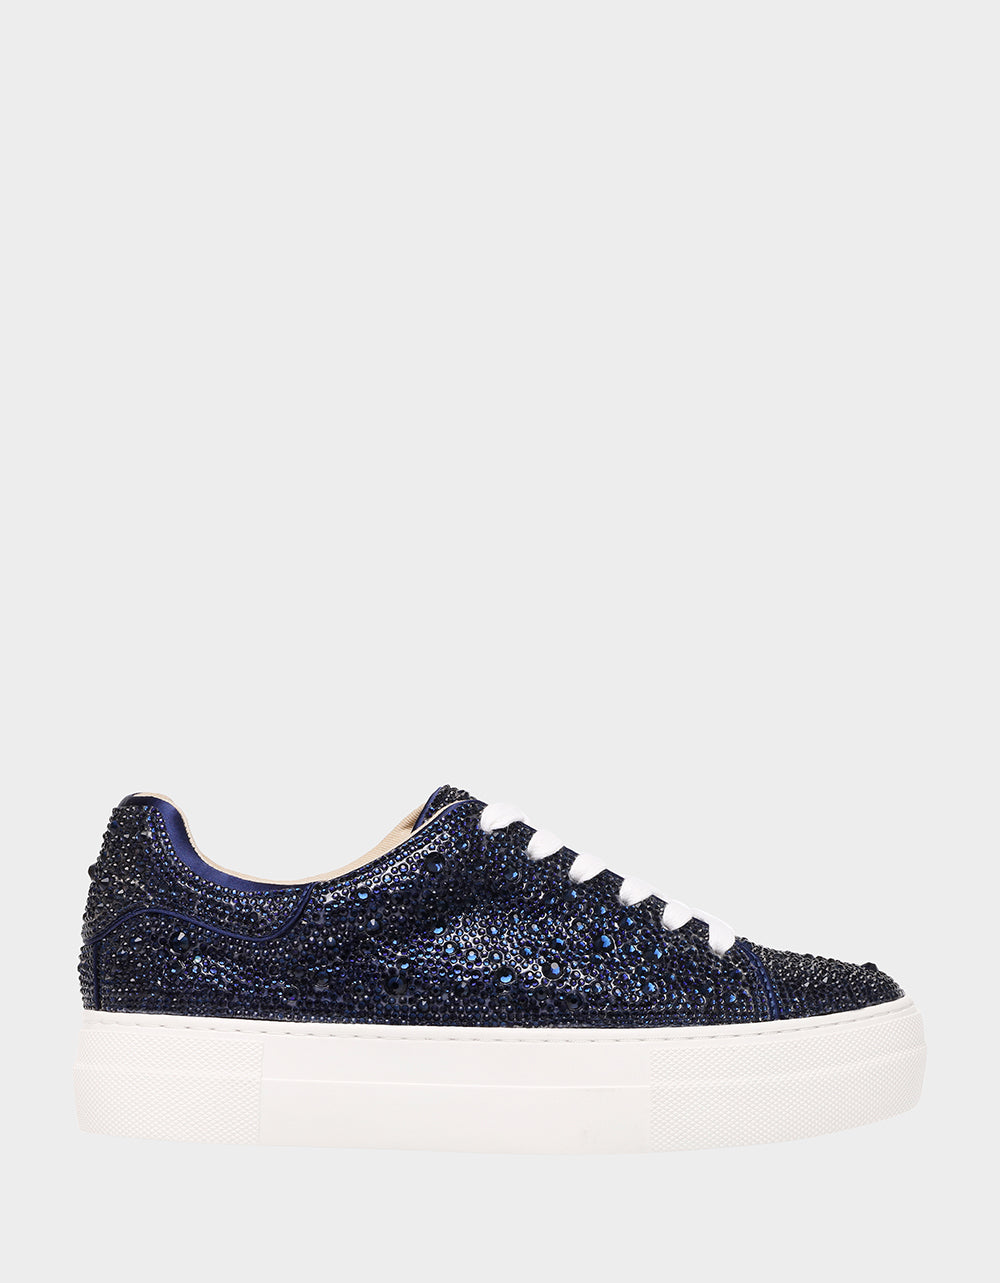 SIDNY RHINESTONES Lace Up Sneakers